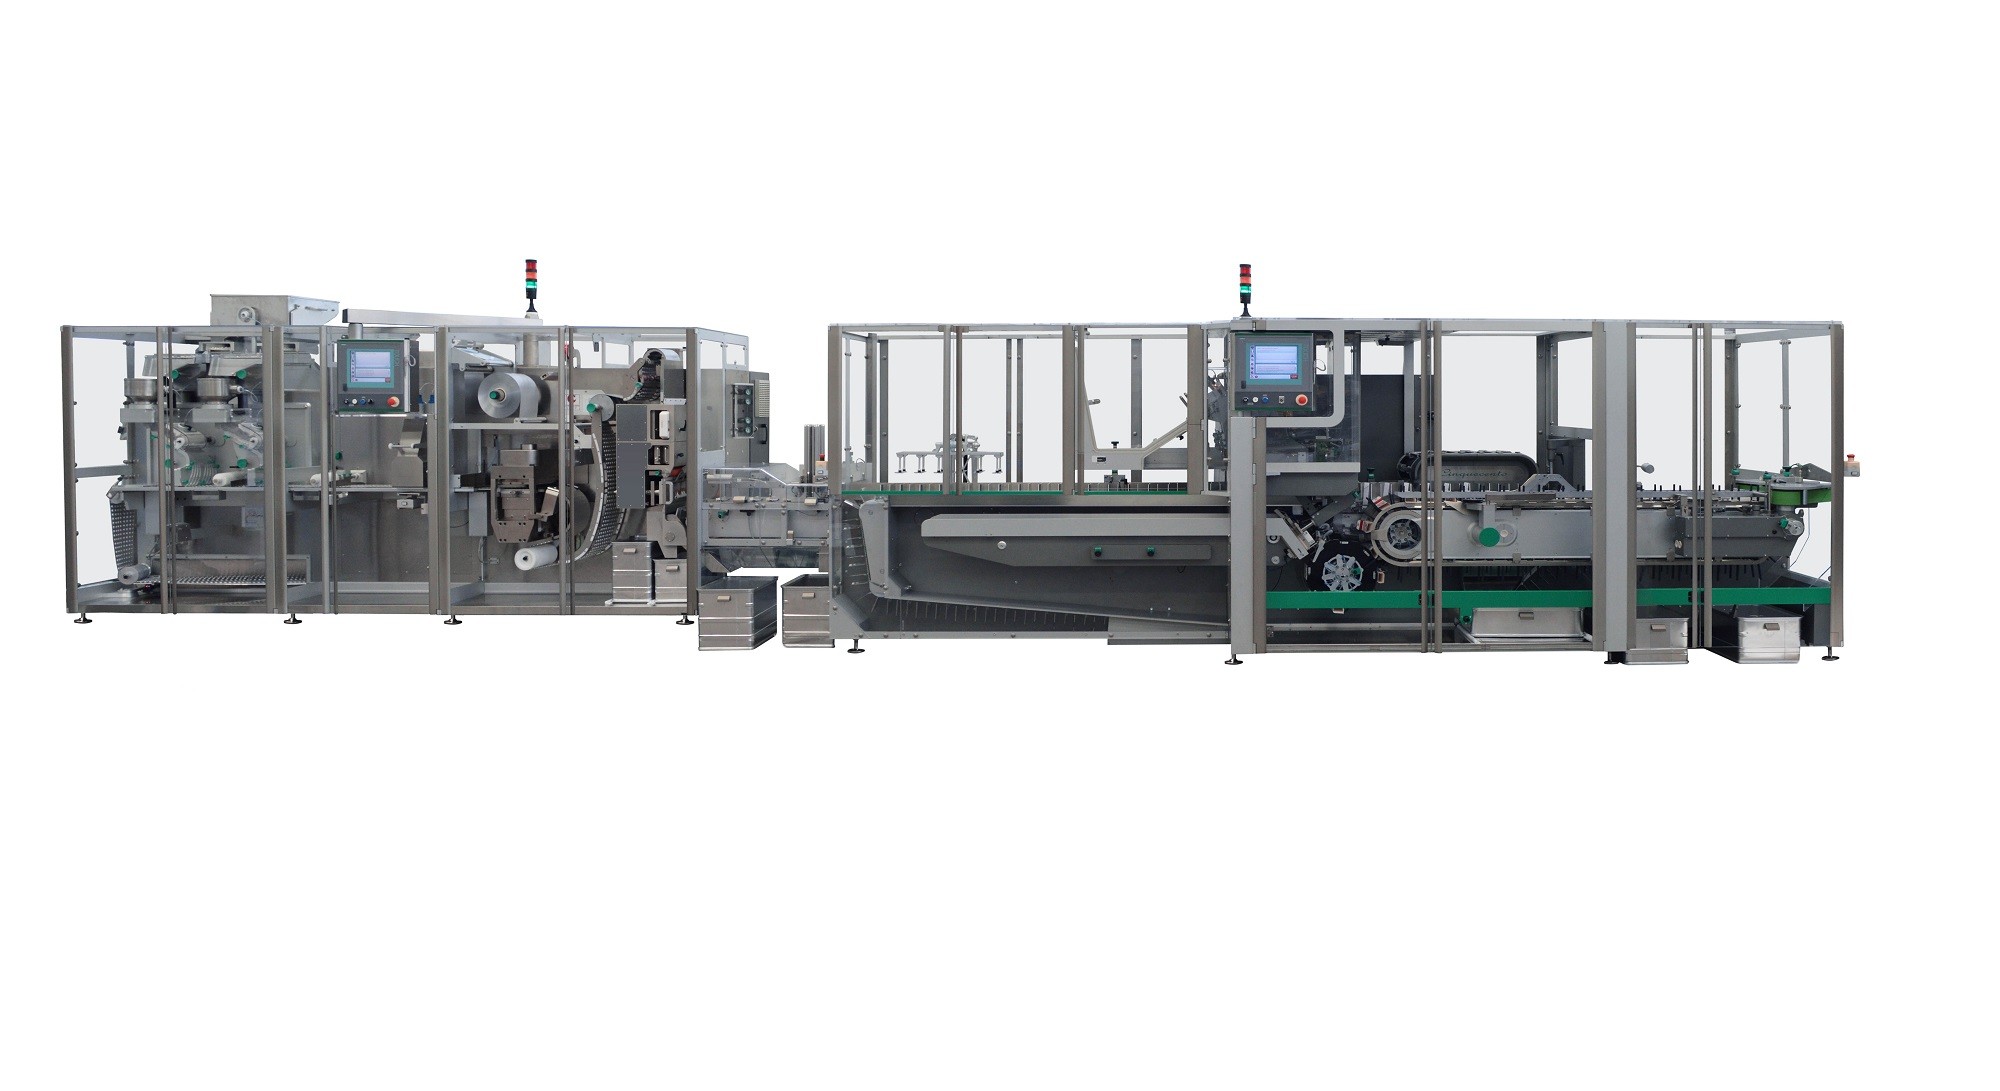 INTEGRA 520 V: MARCHESINI’S MOST TECHNOLOGICAL BLISTER PACKAGING LINE ON SHOW FOR THE FIRST TIME AT INTERPACK